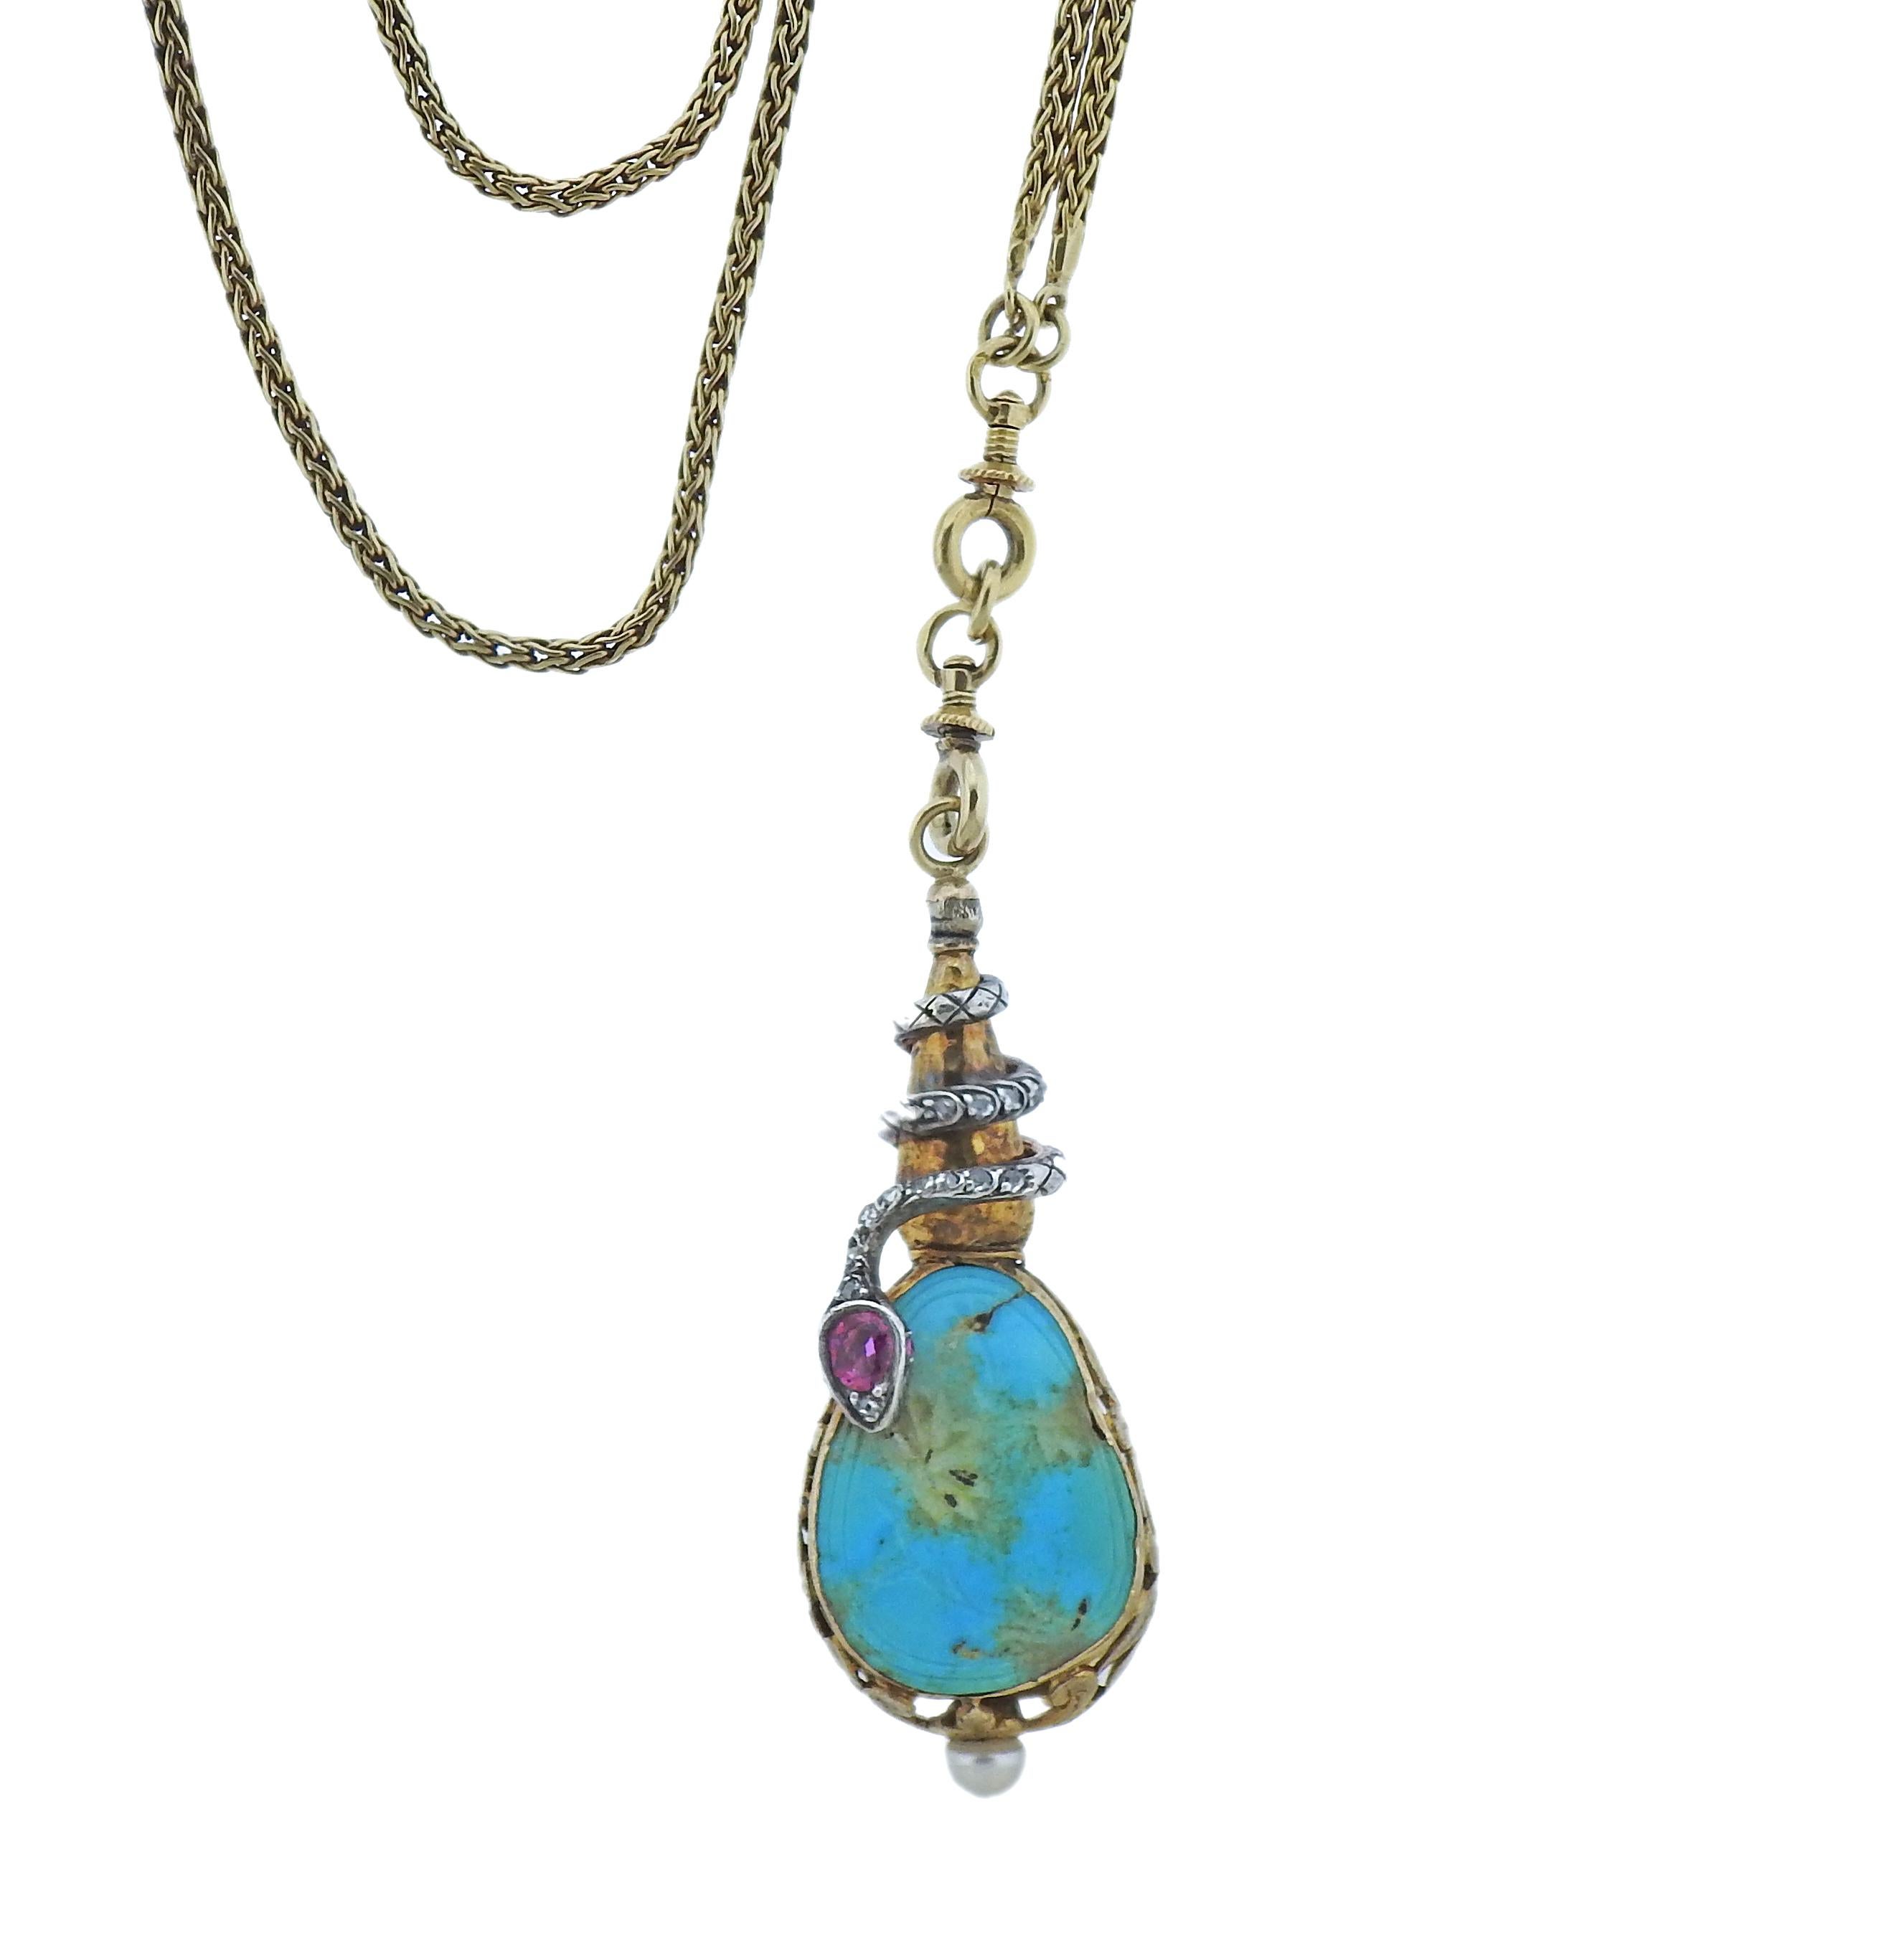 Antique 14k gold long fob chain, with attached pendant, featuring carved turquoise,  adorned with wrapped around snake design, set with ruby, rose cut diamonds. One pearl on the bottom of the pendant - 5mm. Necklace/chain is 62